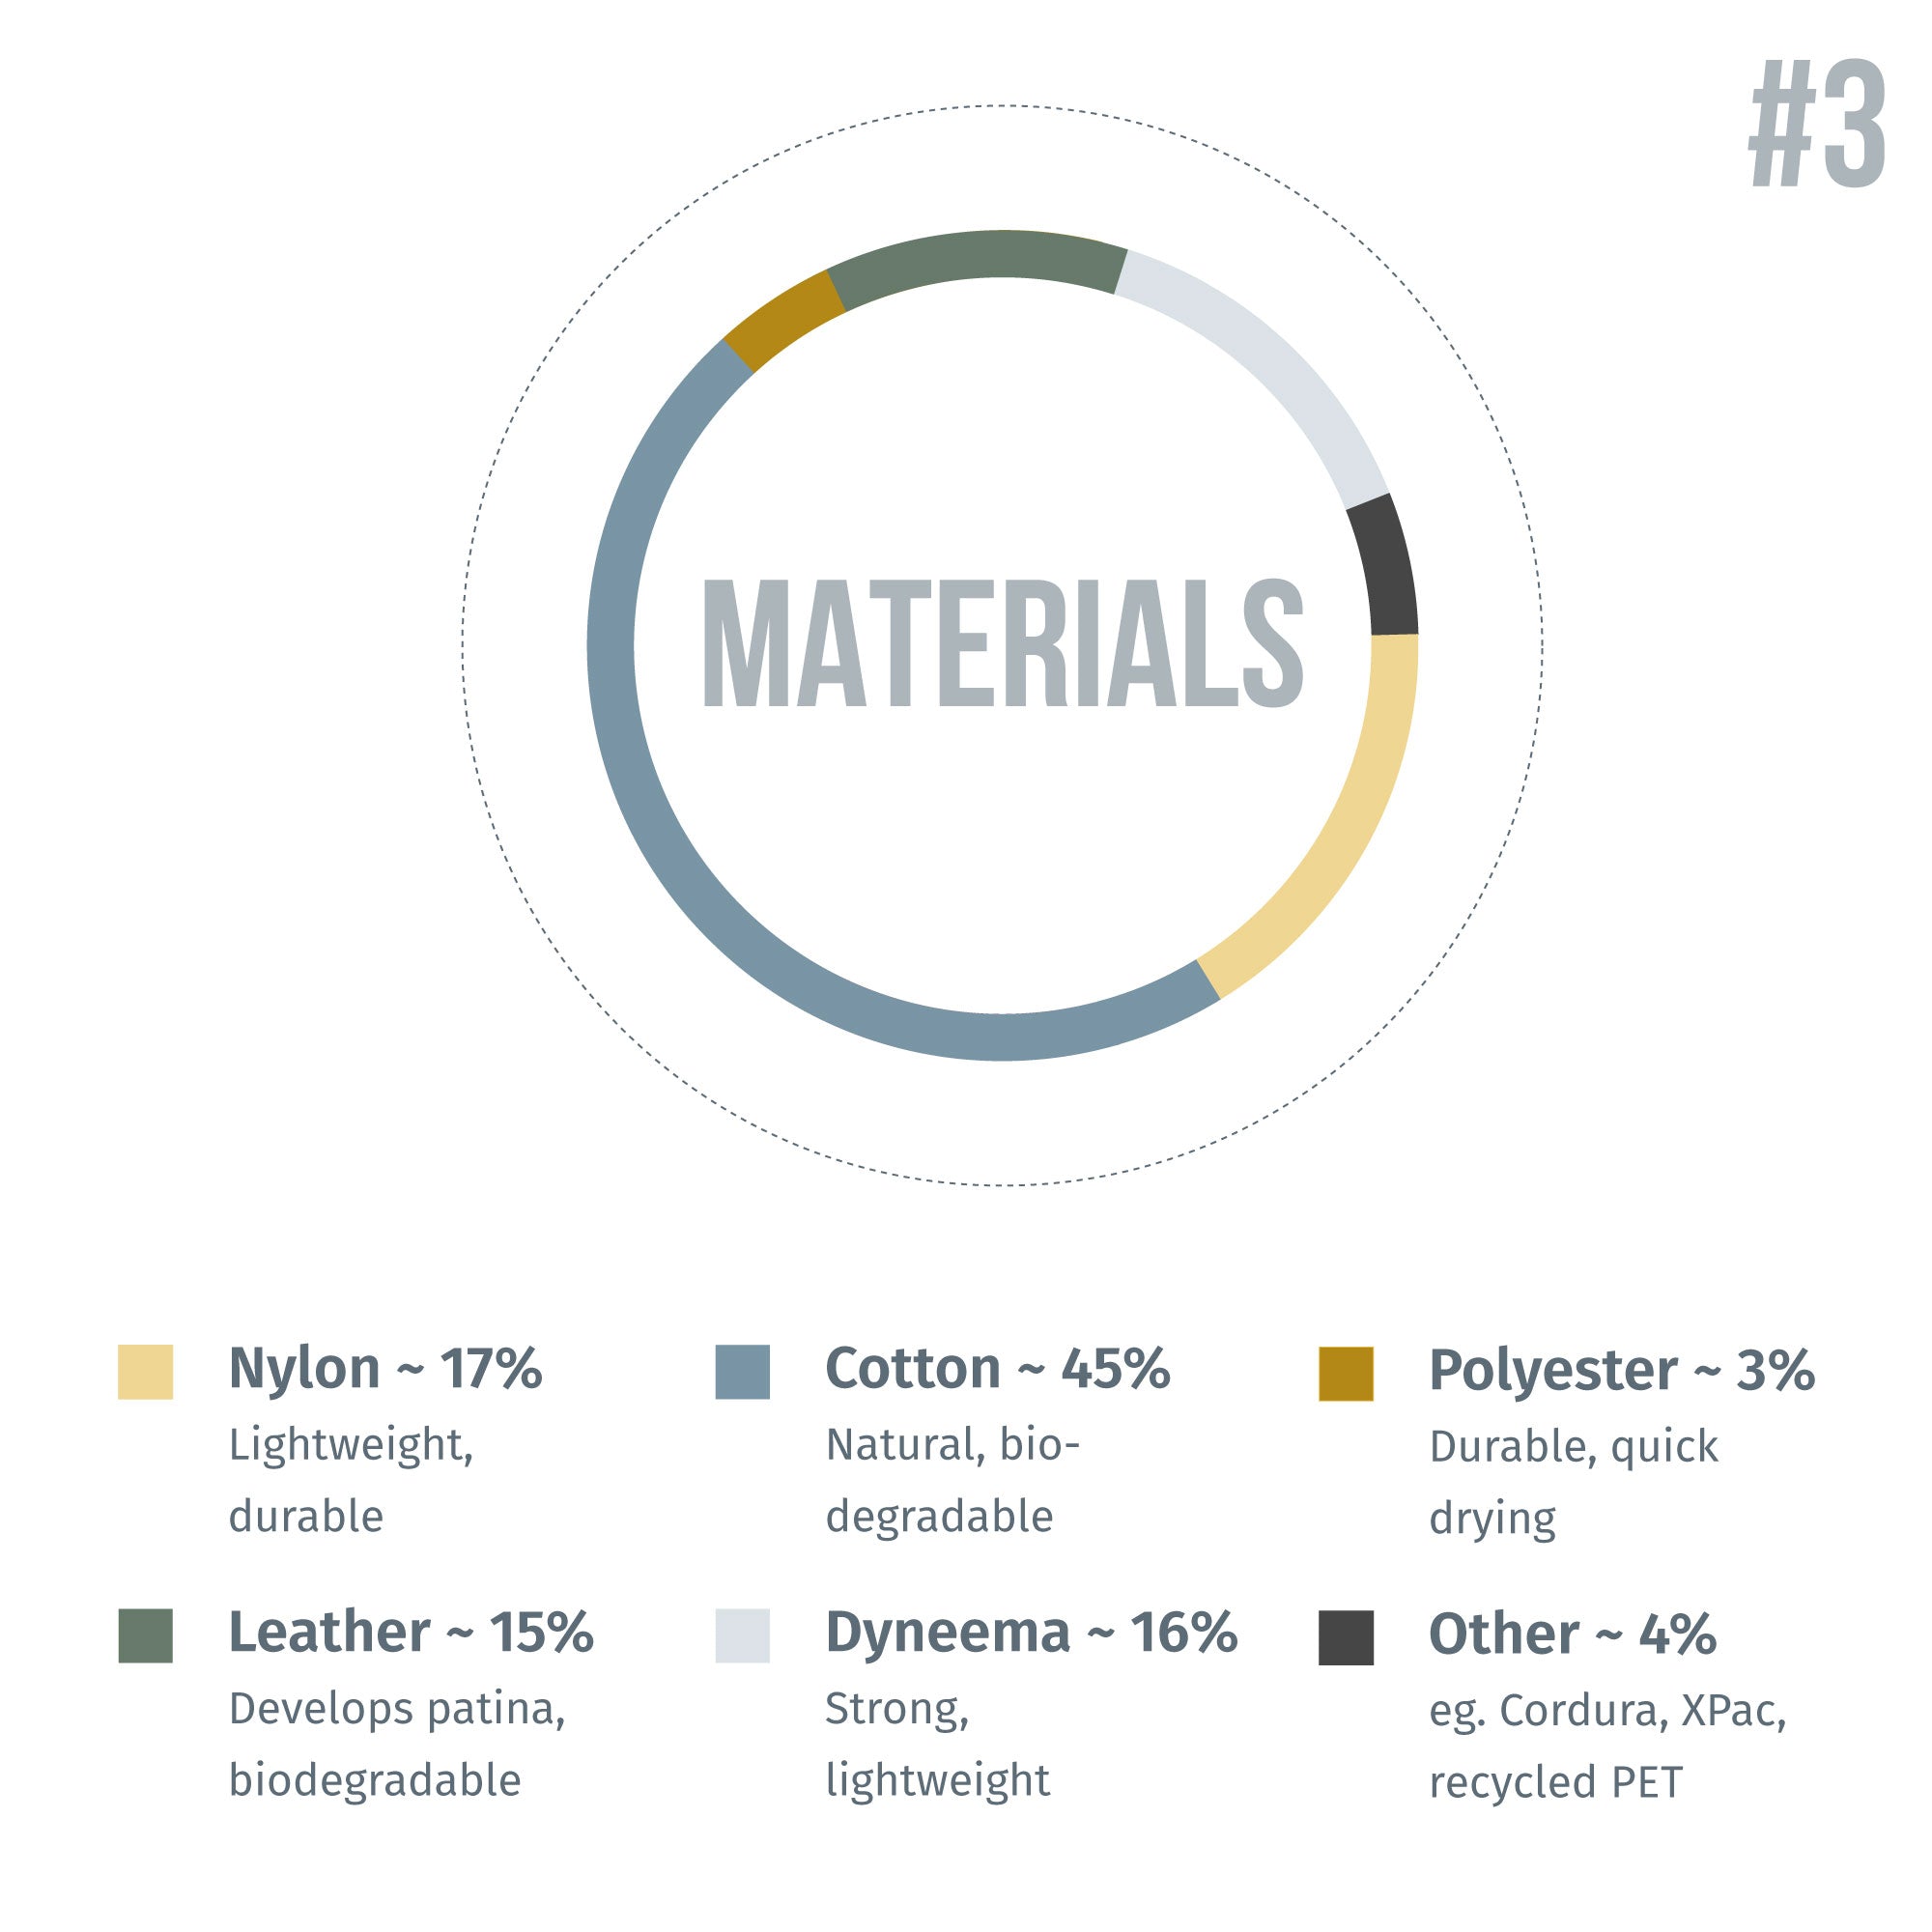 Infographic showing waxed cotton to be the most popular material in a survey for the Wingback Backpack